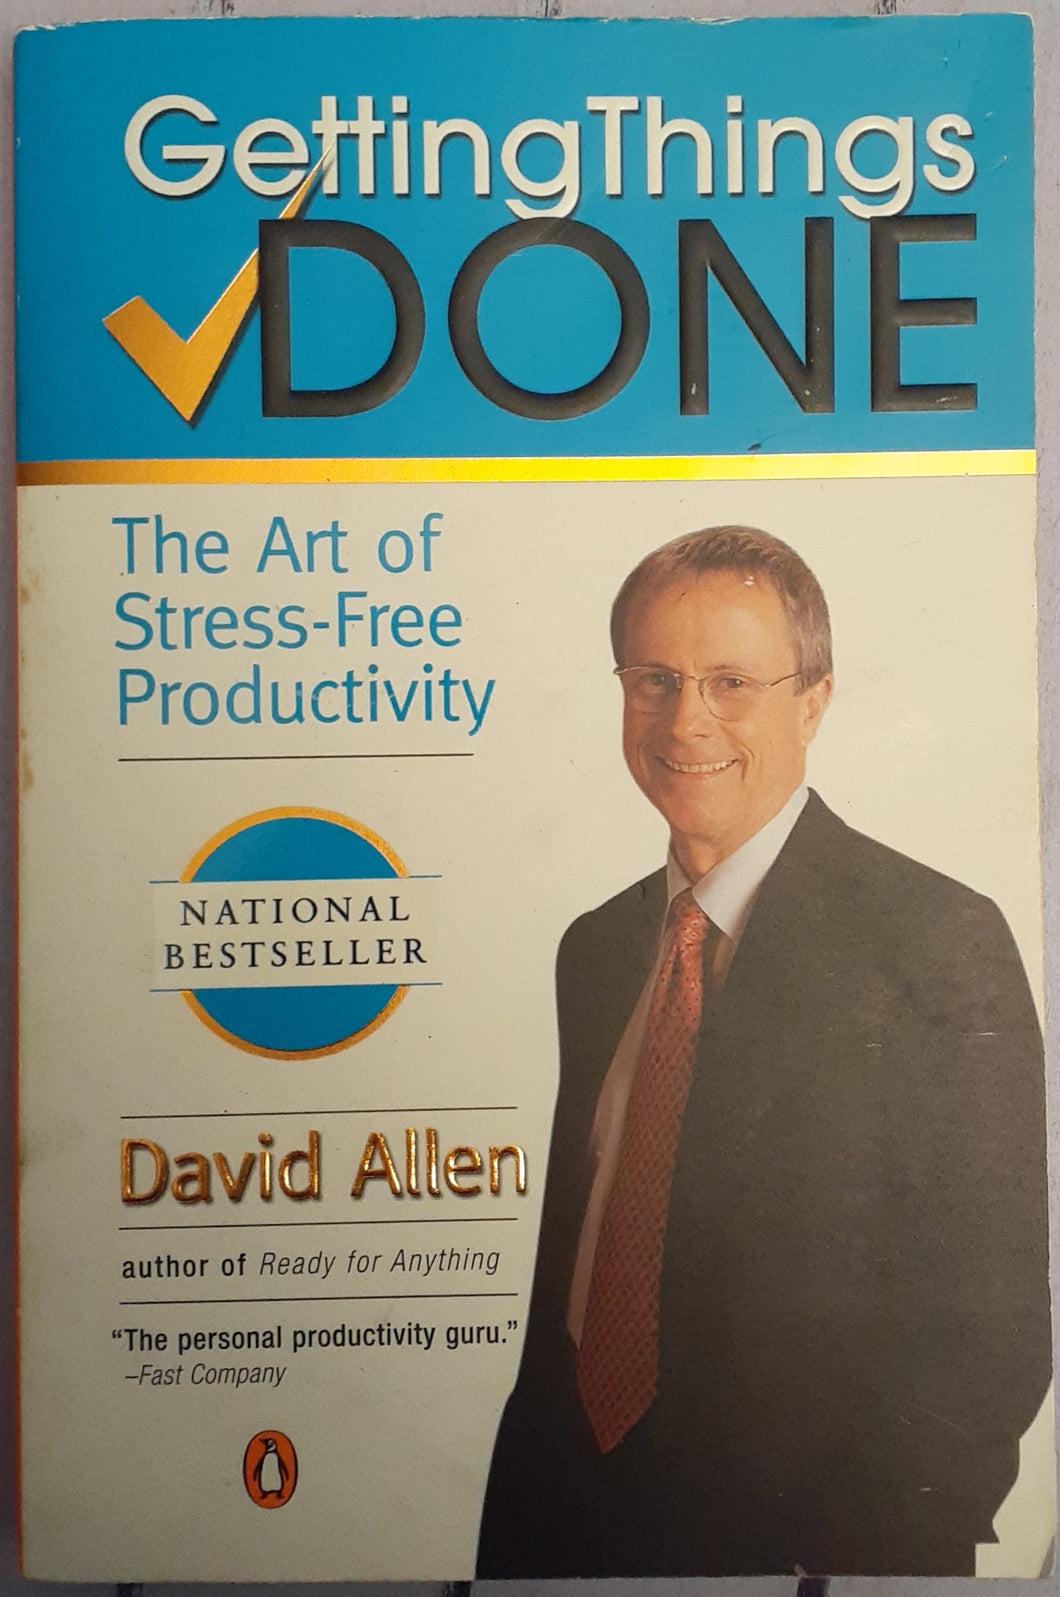 Getting Things Done - The Art of Stress-Fee Productivity